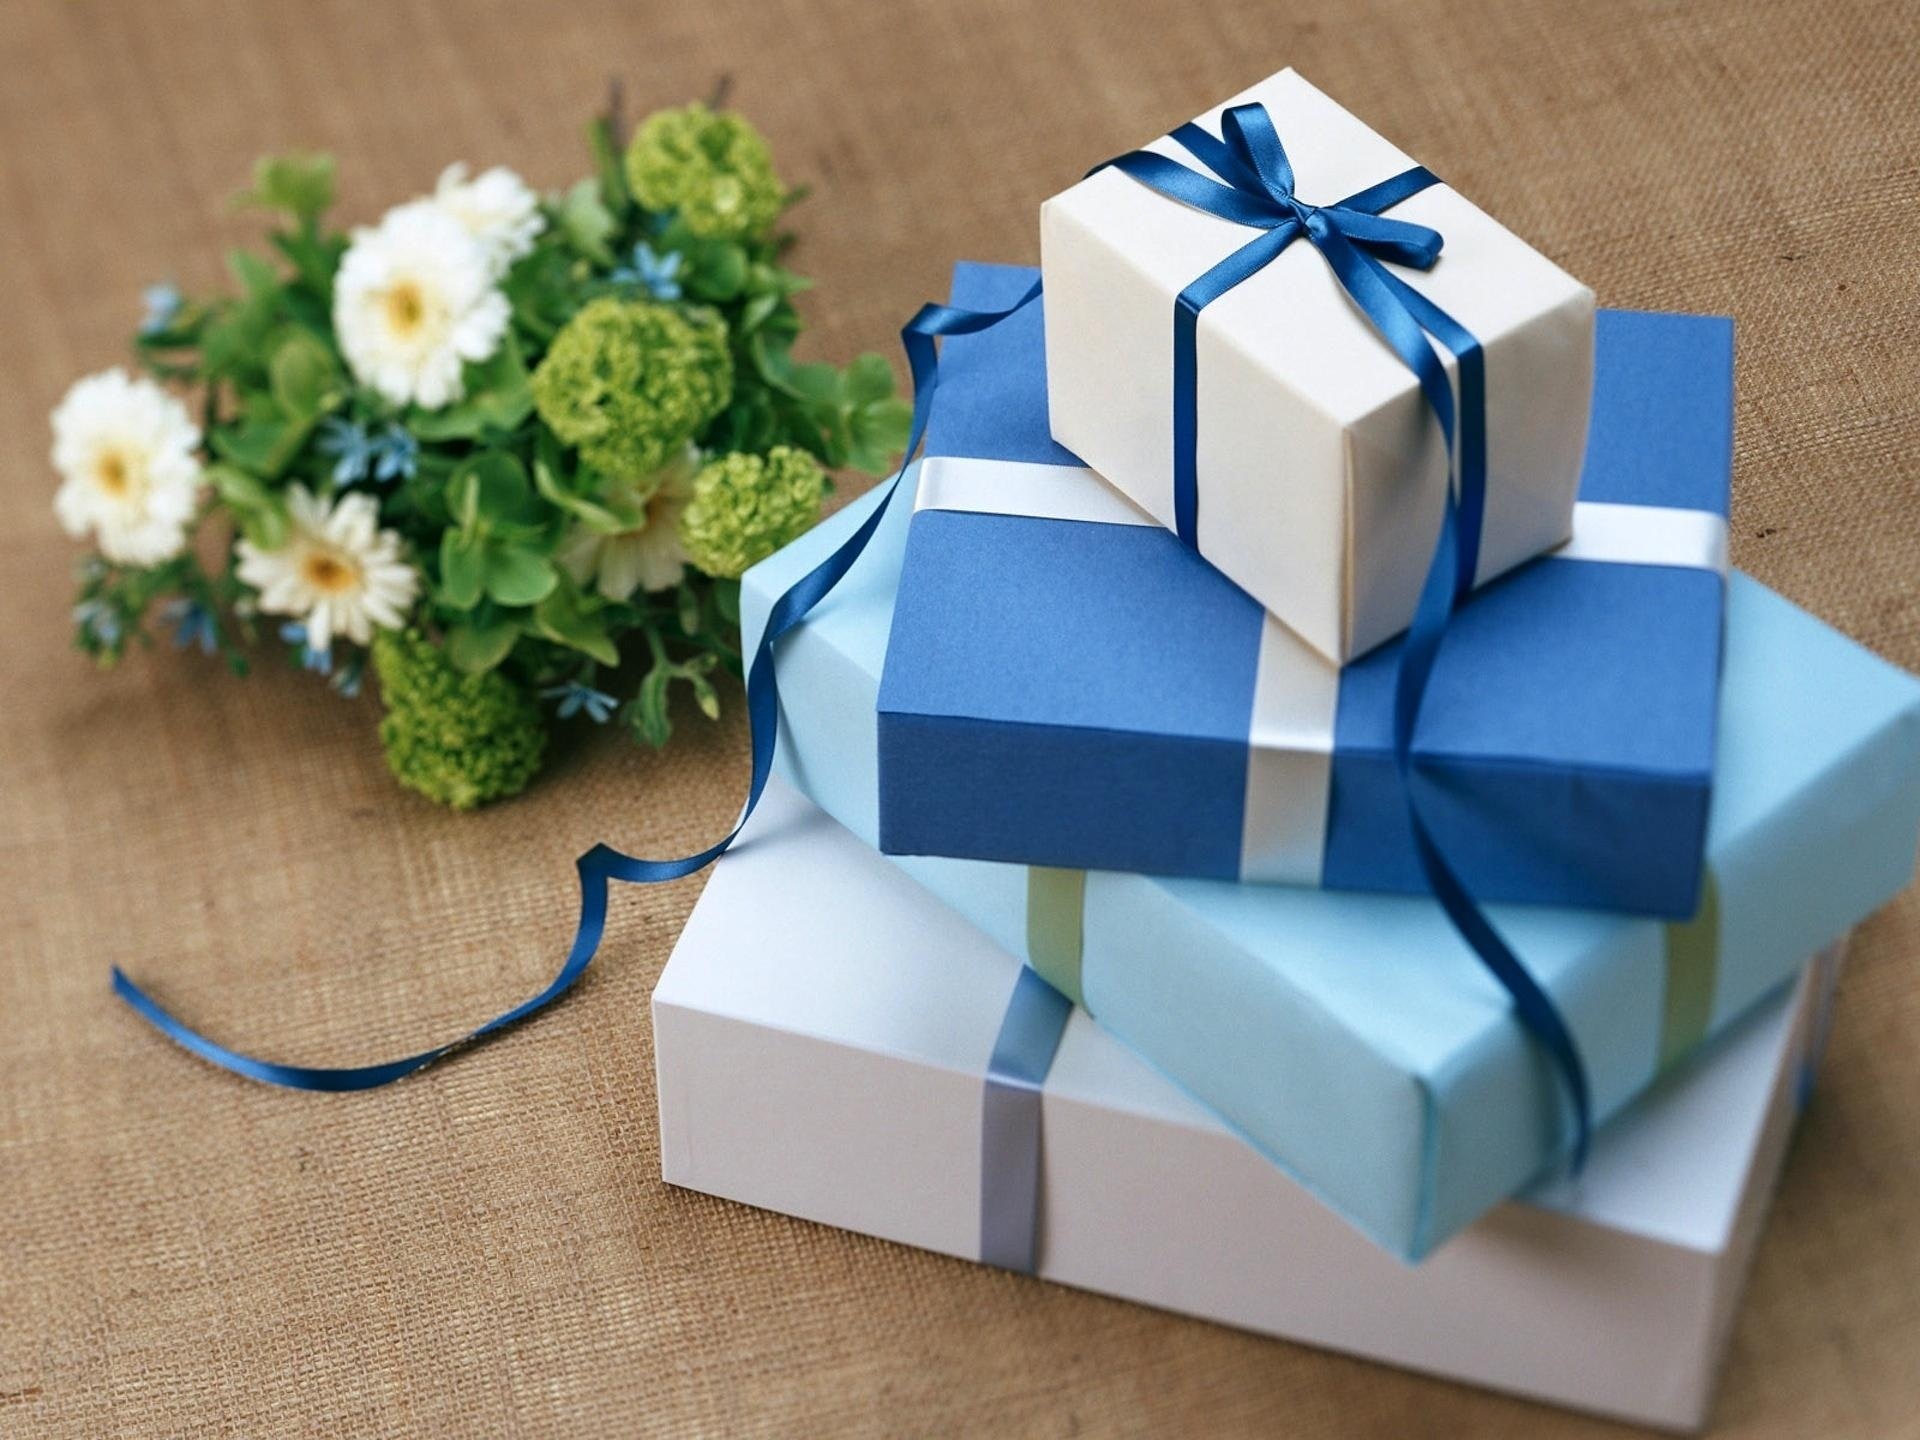 What Should Gifts To Purchase For A Newly Wed Couple?